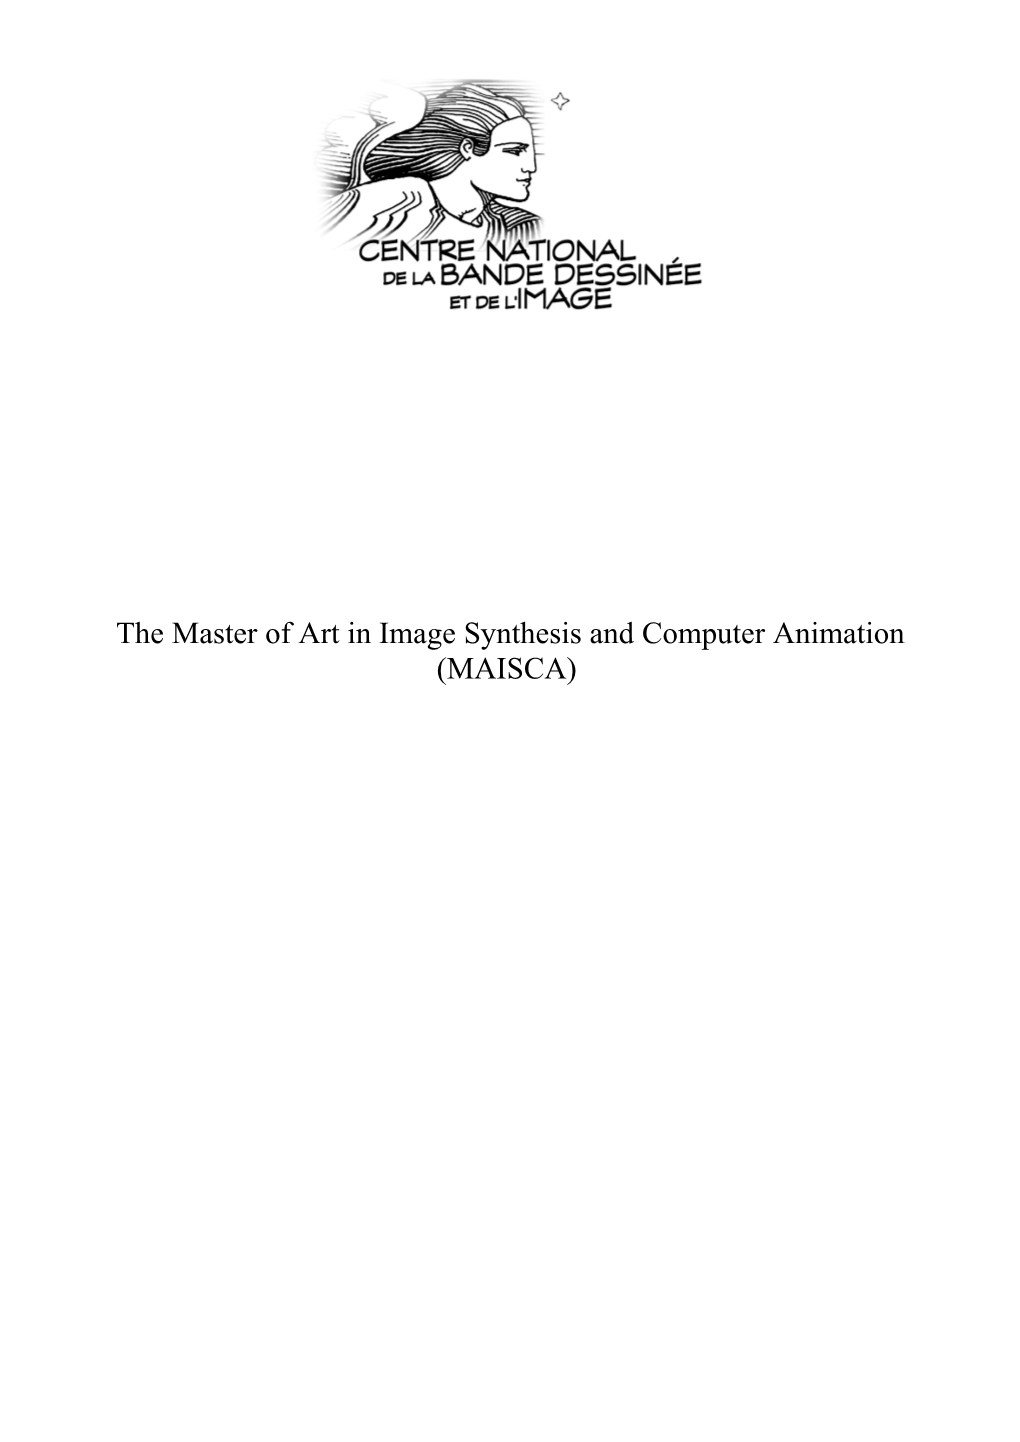 The Master of Art in Image Synthesis and Computer Animation (MAISCA)